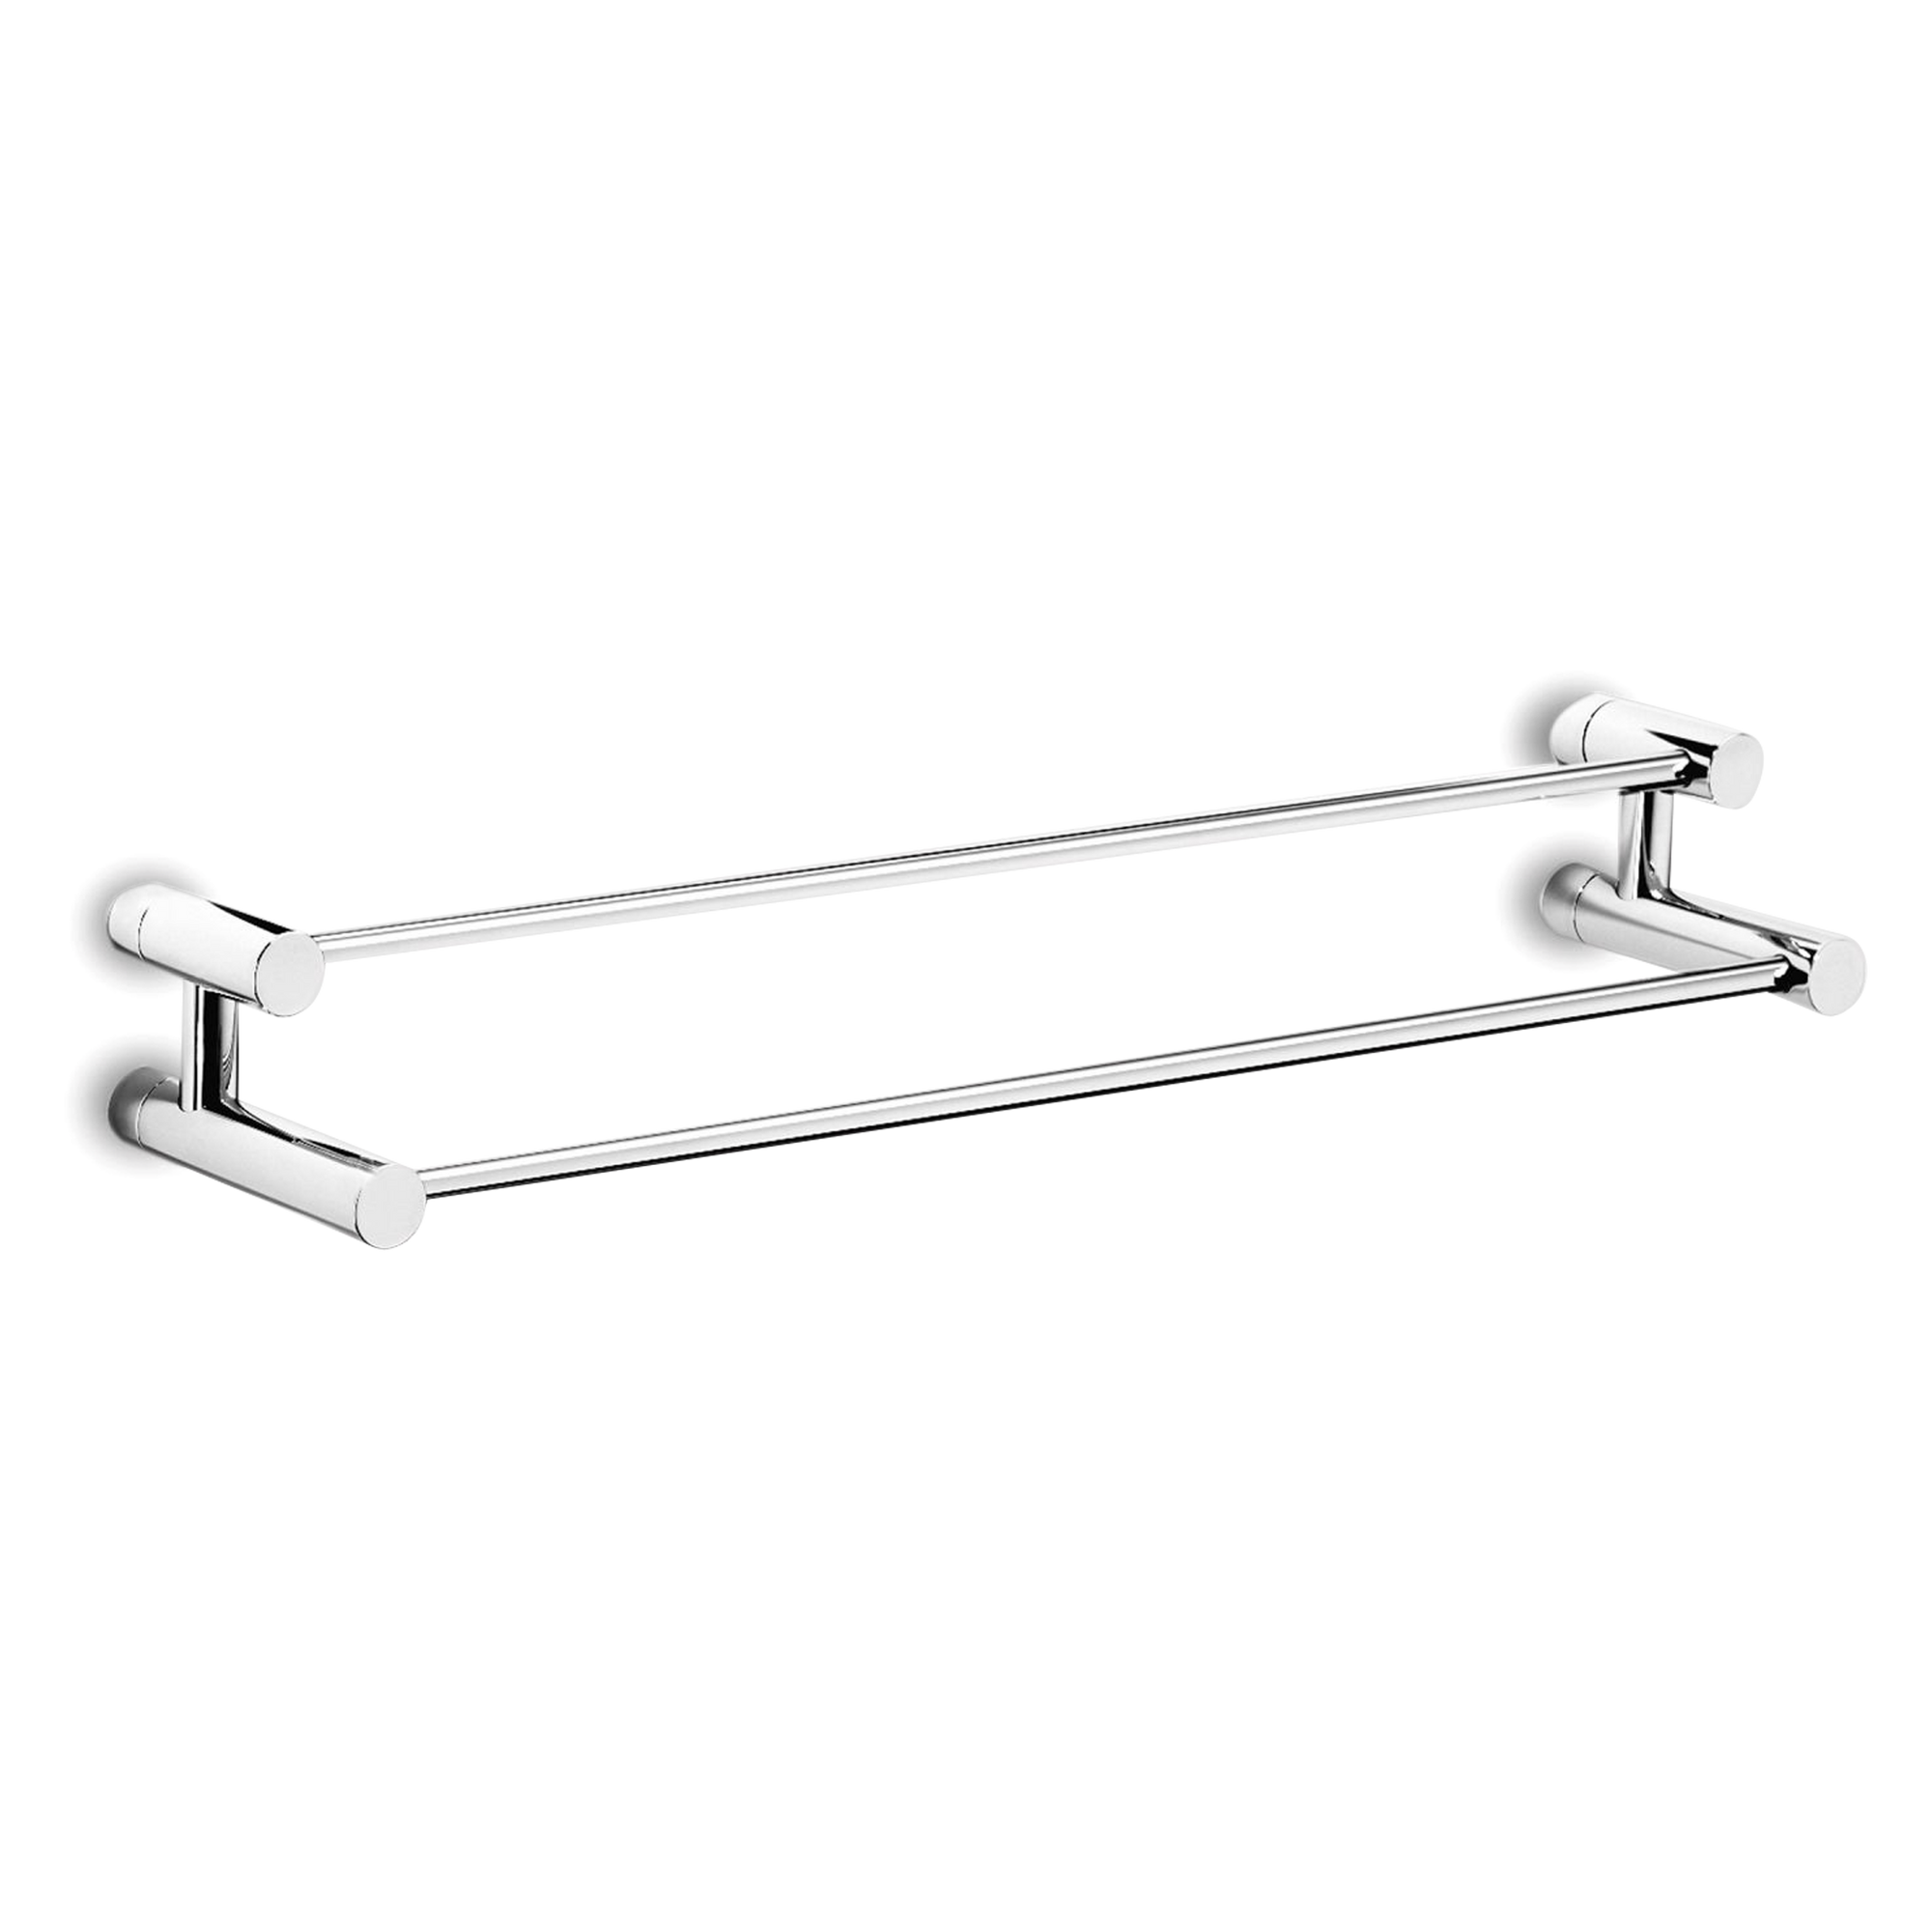 Minimalist and modern, the functional Xenon Double Towel Bar has a flawless finish.